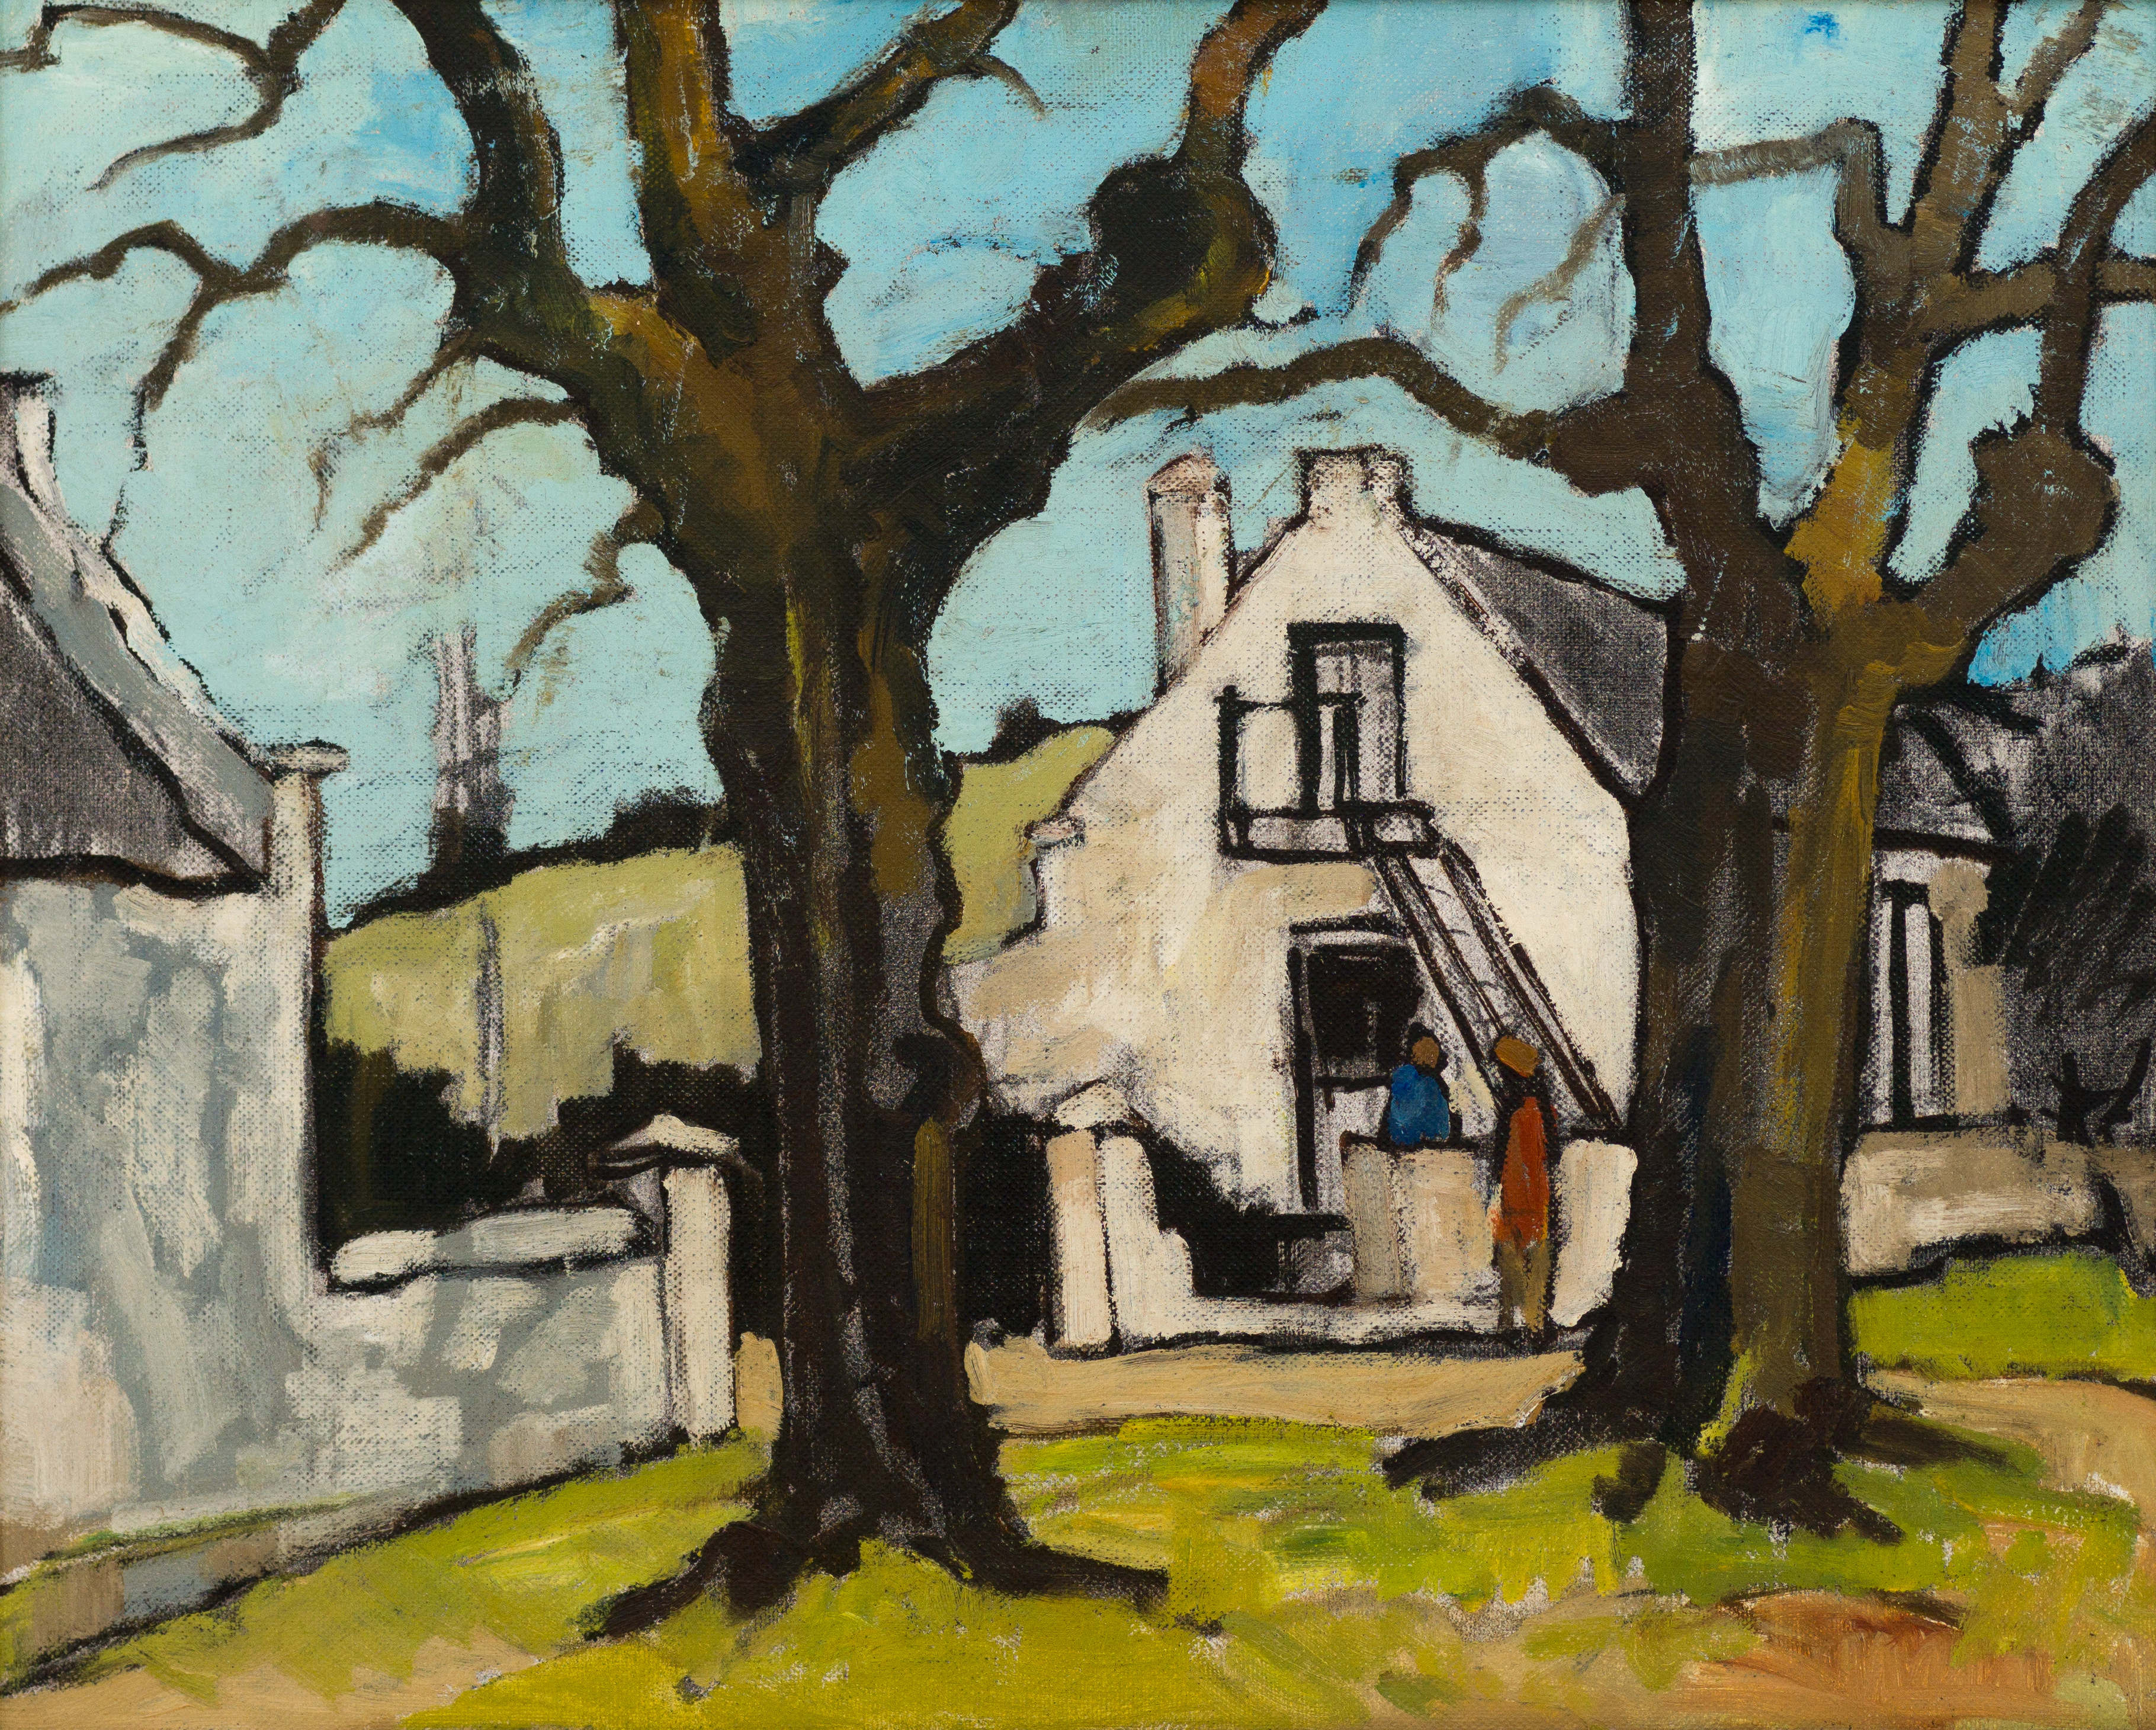 David Botha; Landscape with House and Two Figures